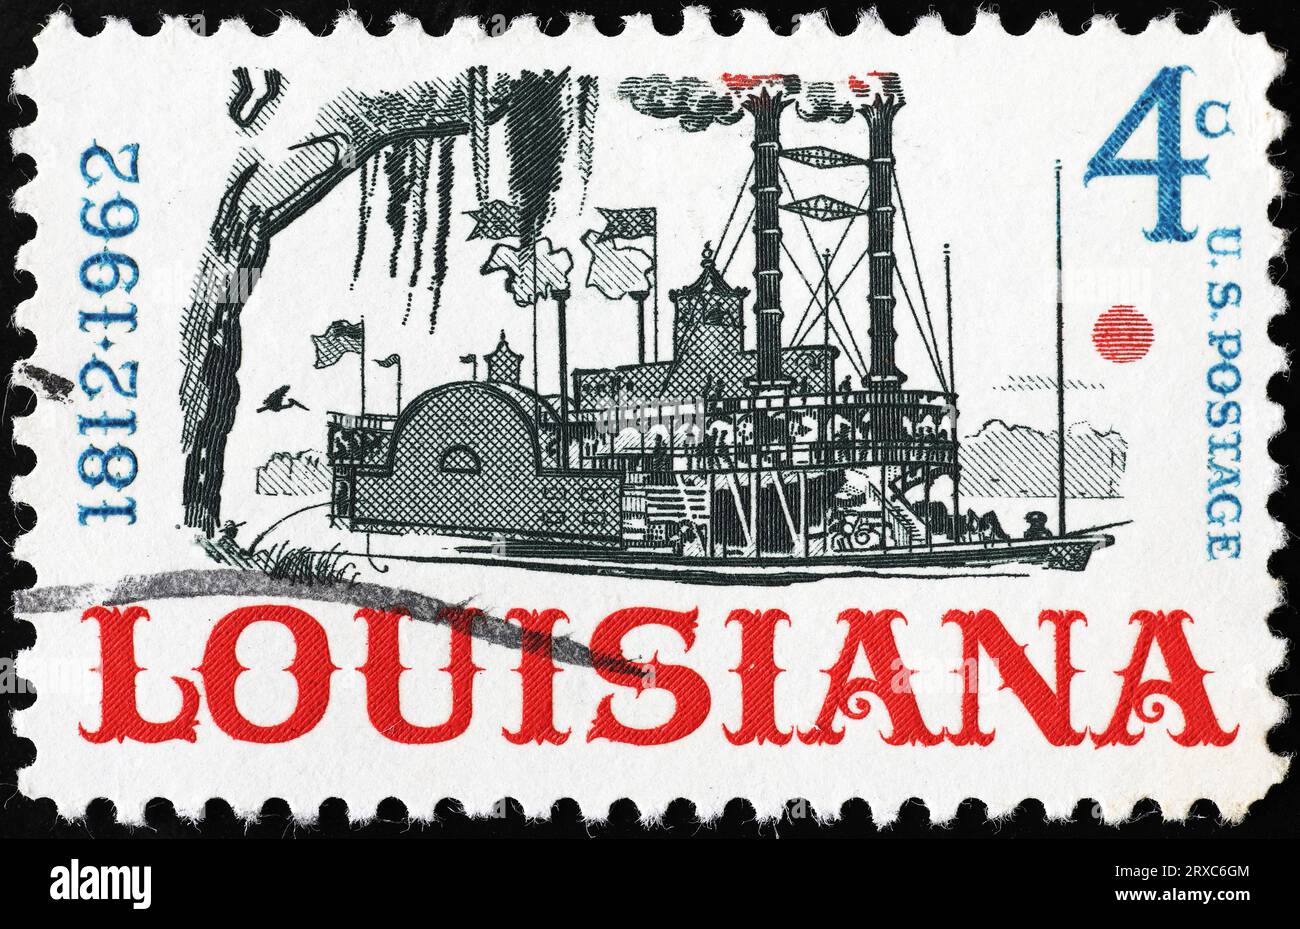 Celebration of Louisiana state on old american stamp Stock Photo